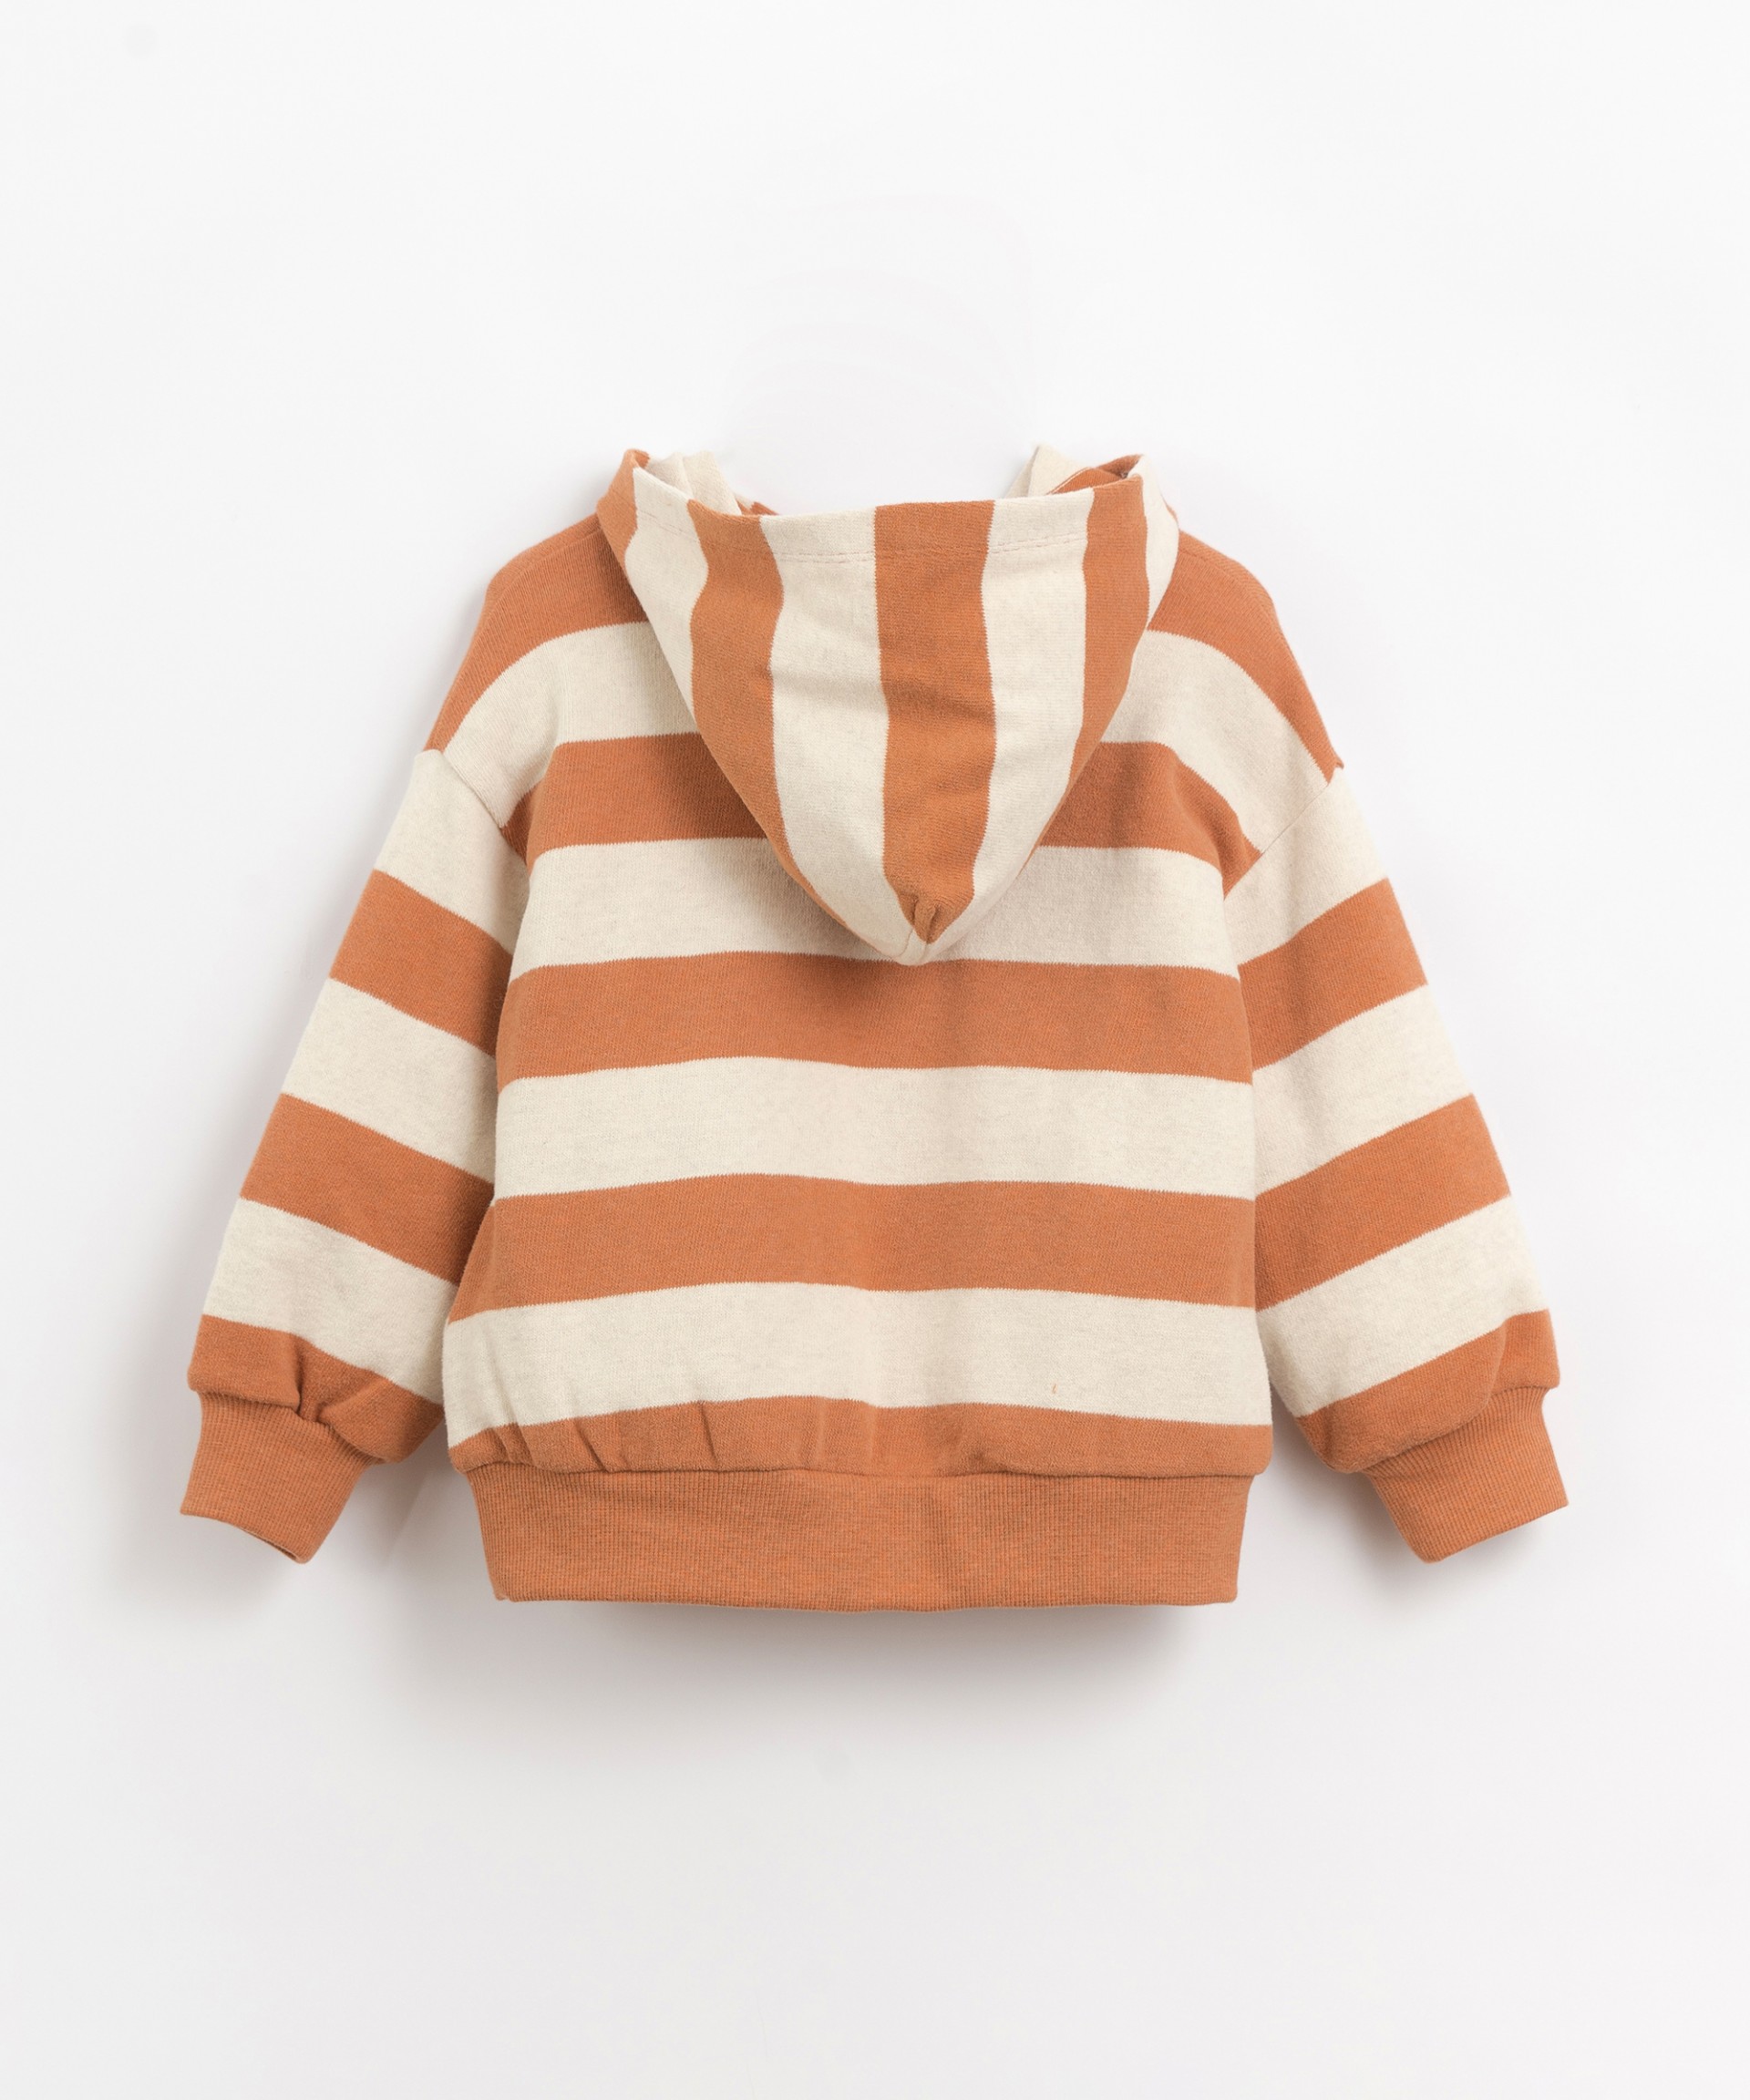 Striped jersey with elastic cuffs and waist | Organic Care